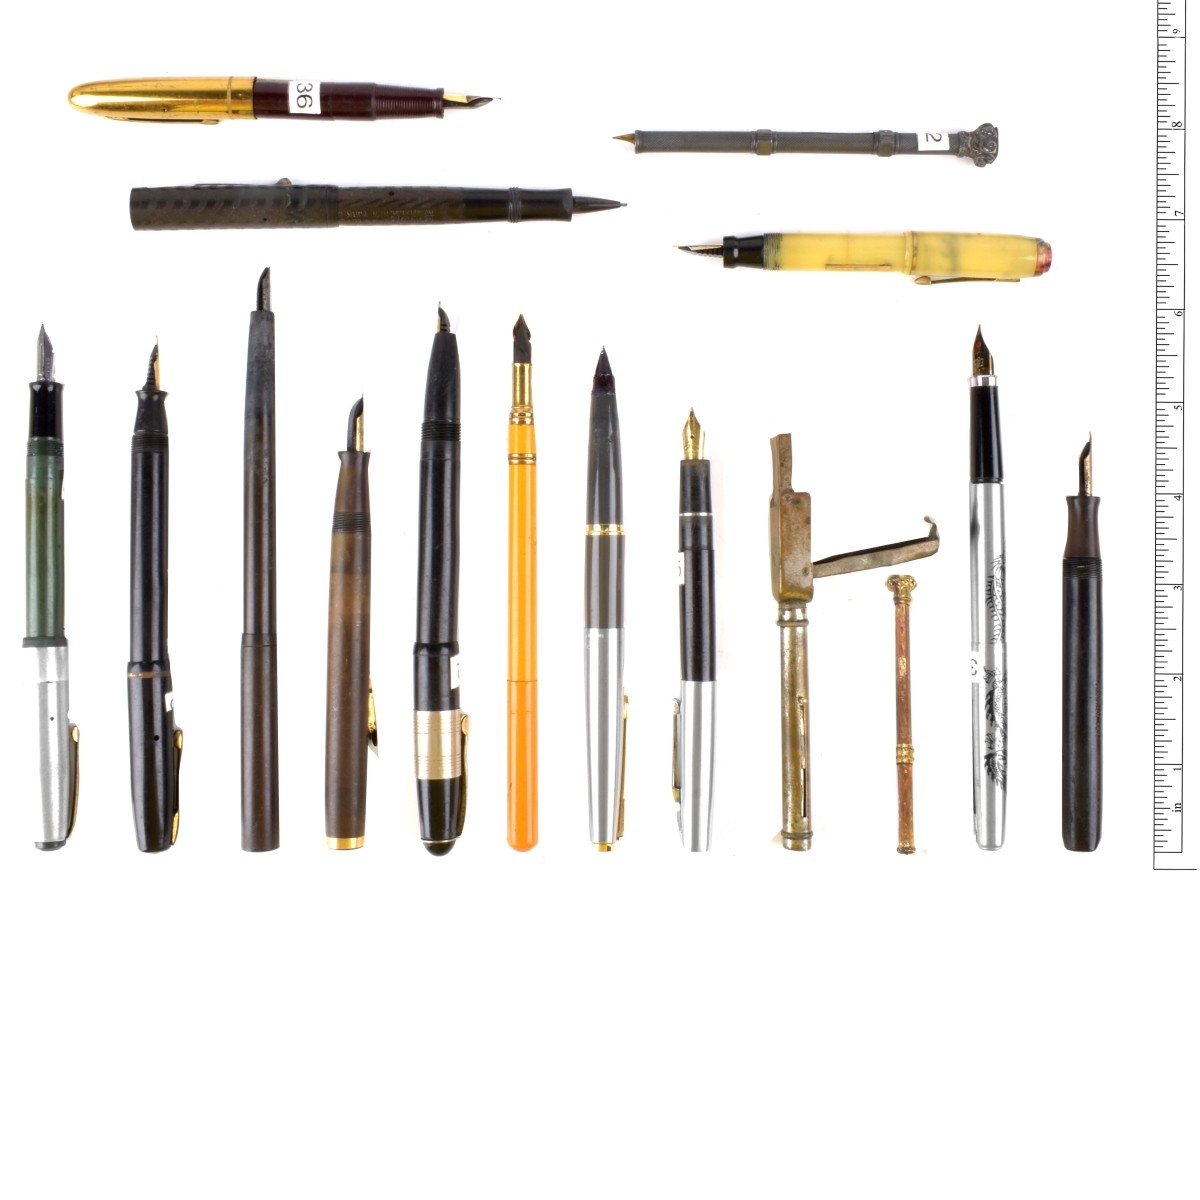 Sixteen Pens and Writing Instruments